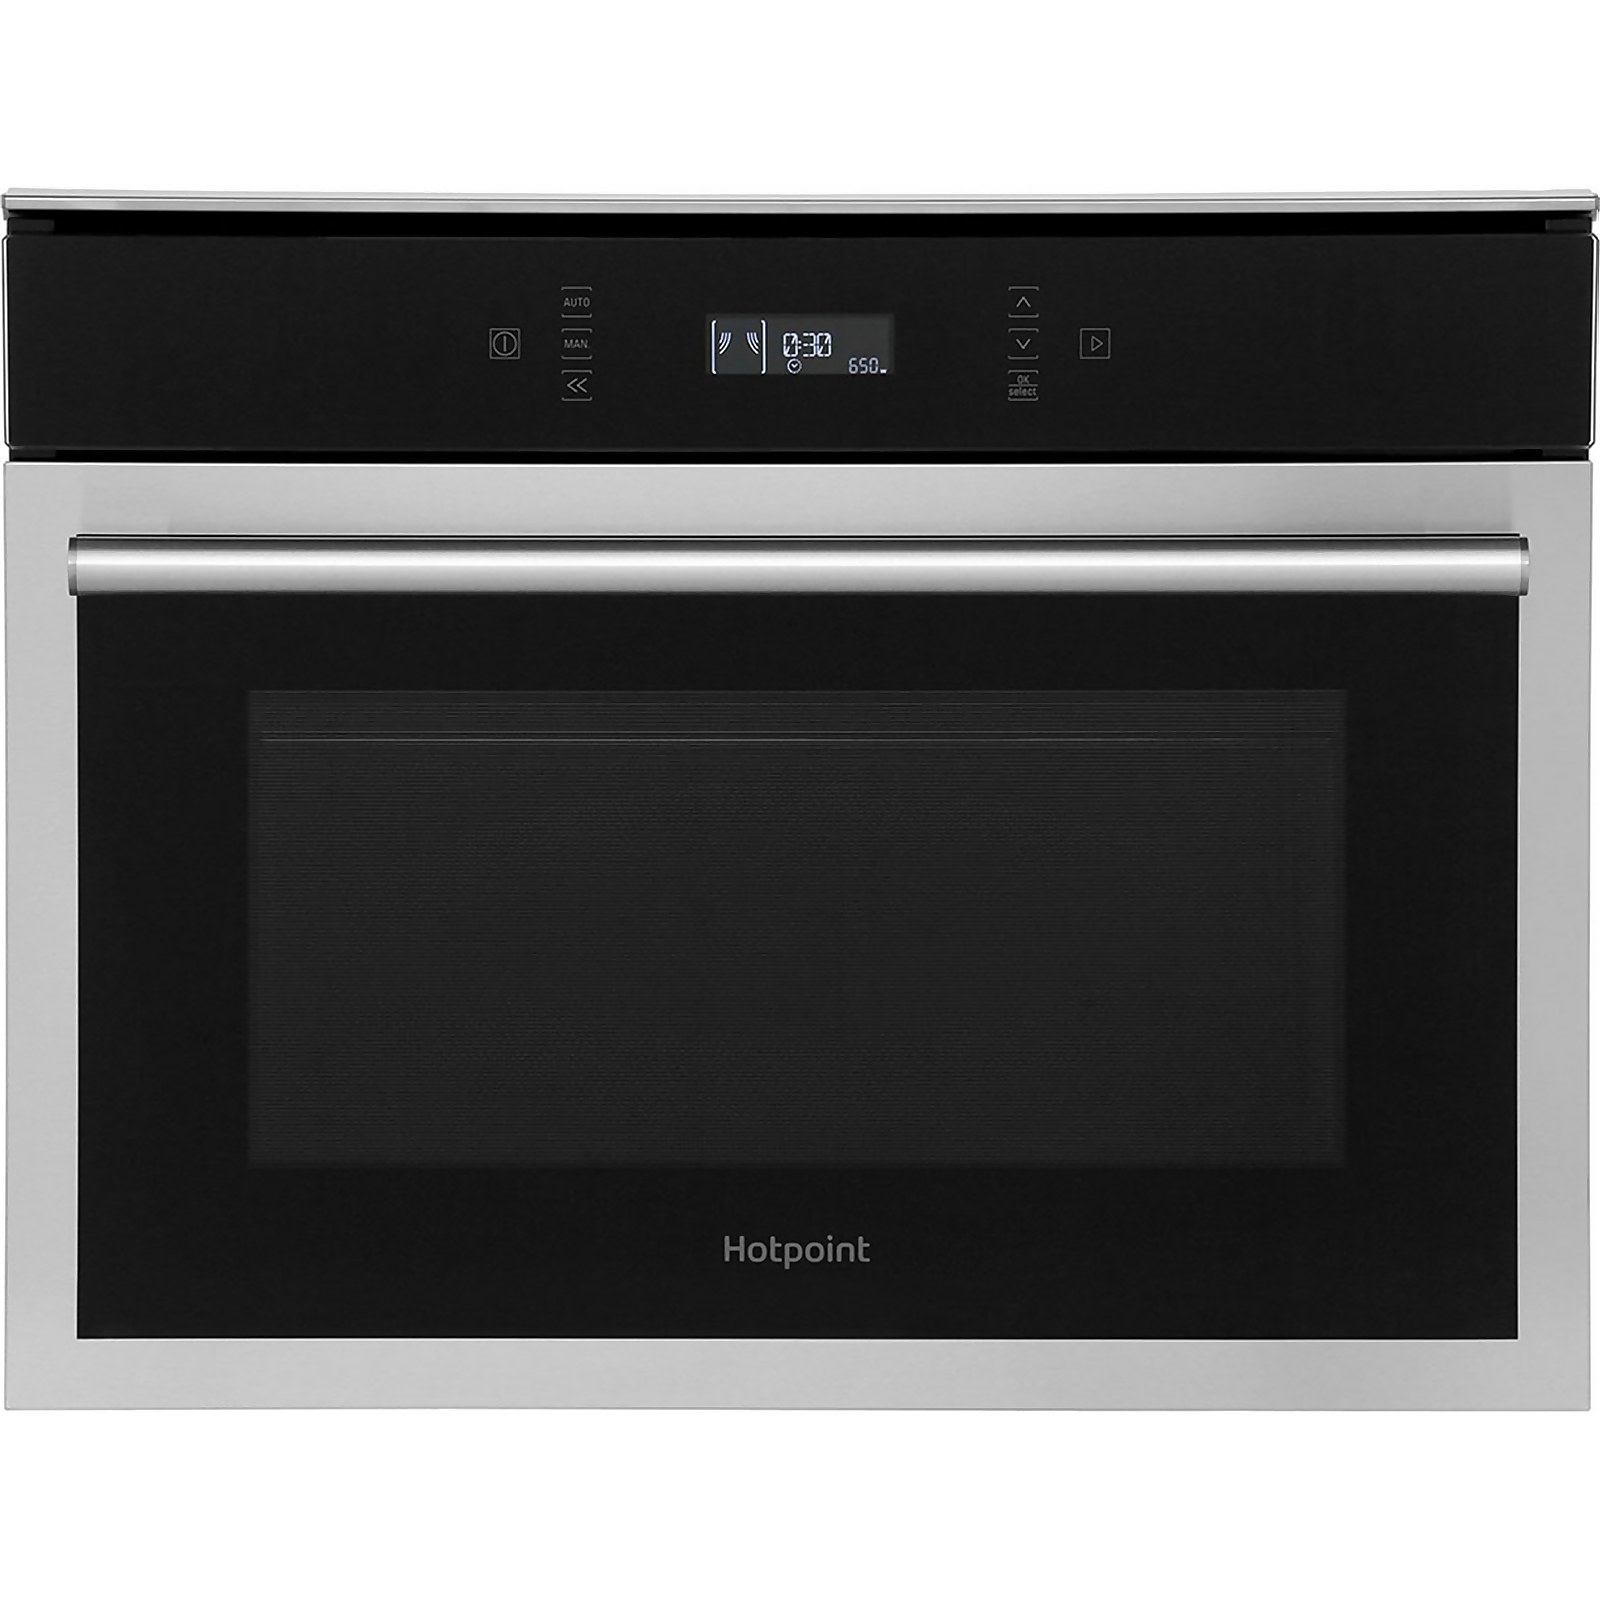 Hotpoint Class 6 MP676IXH Built In Combination Microwave Oven - Stainless Steel